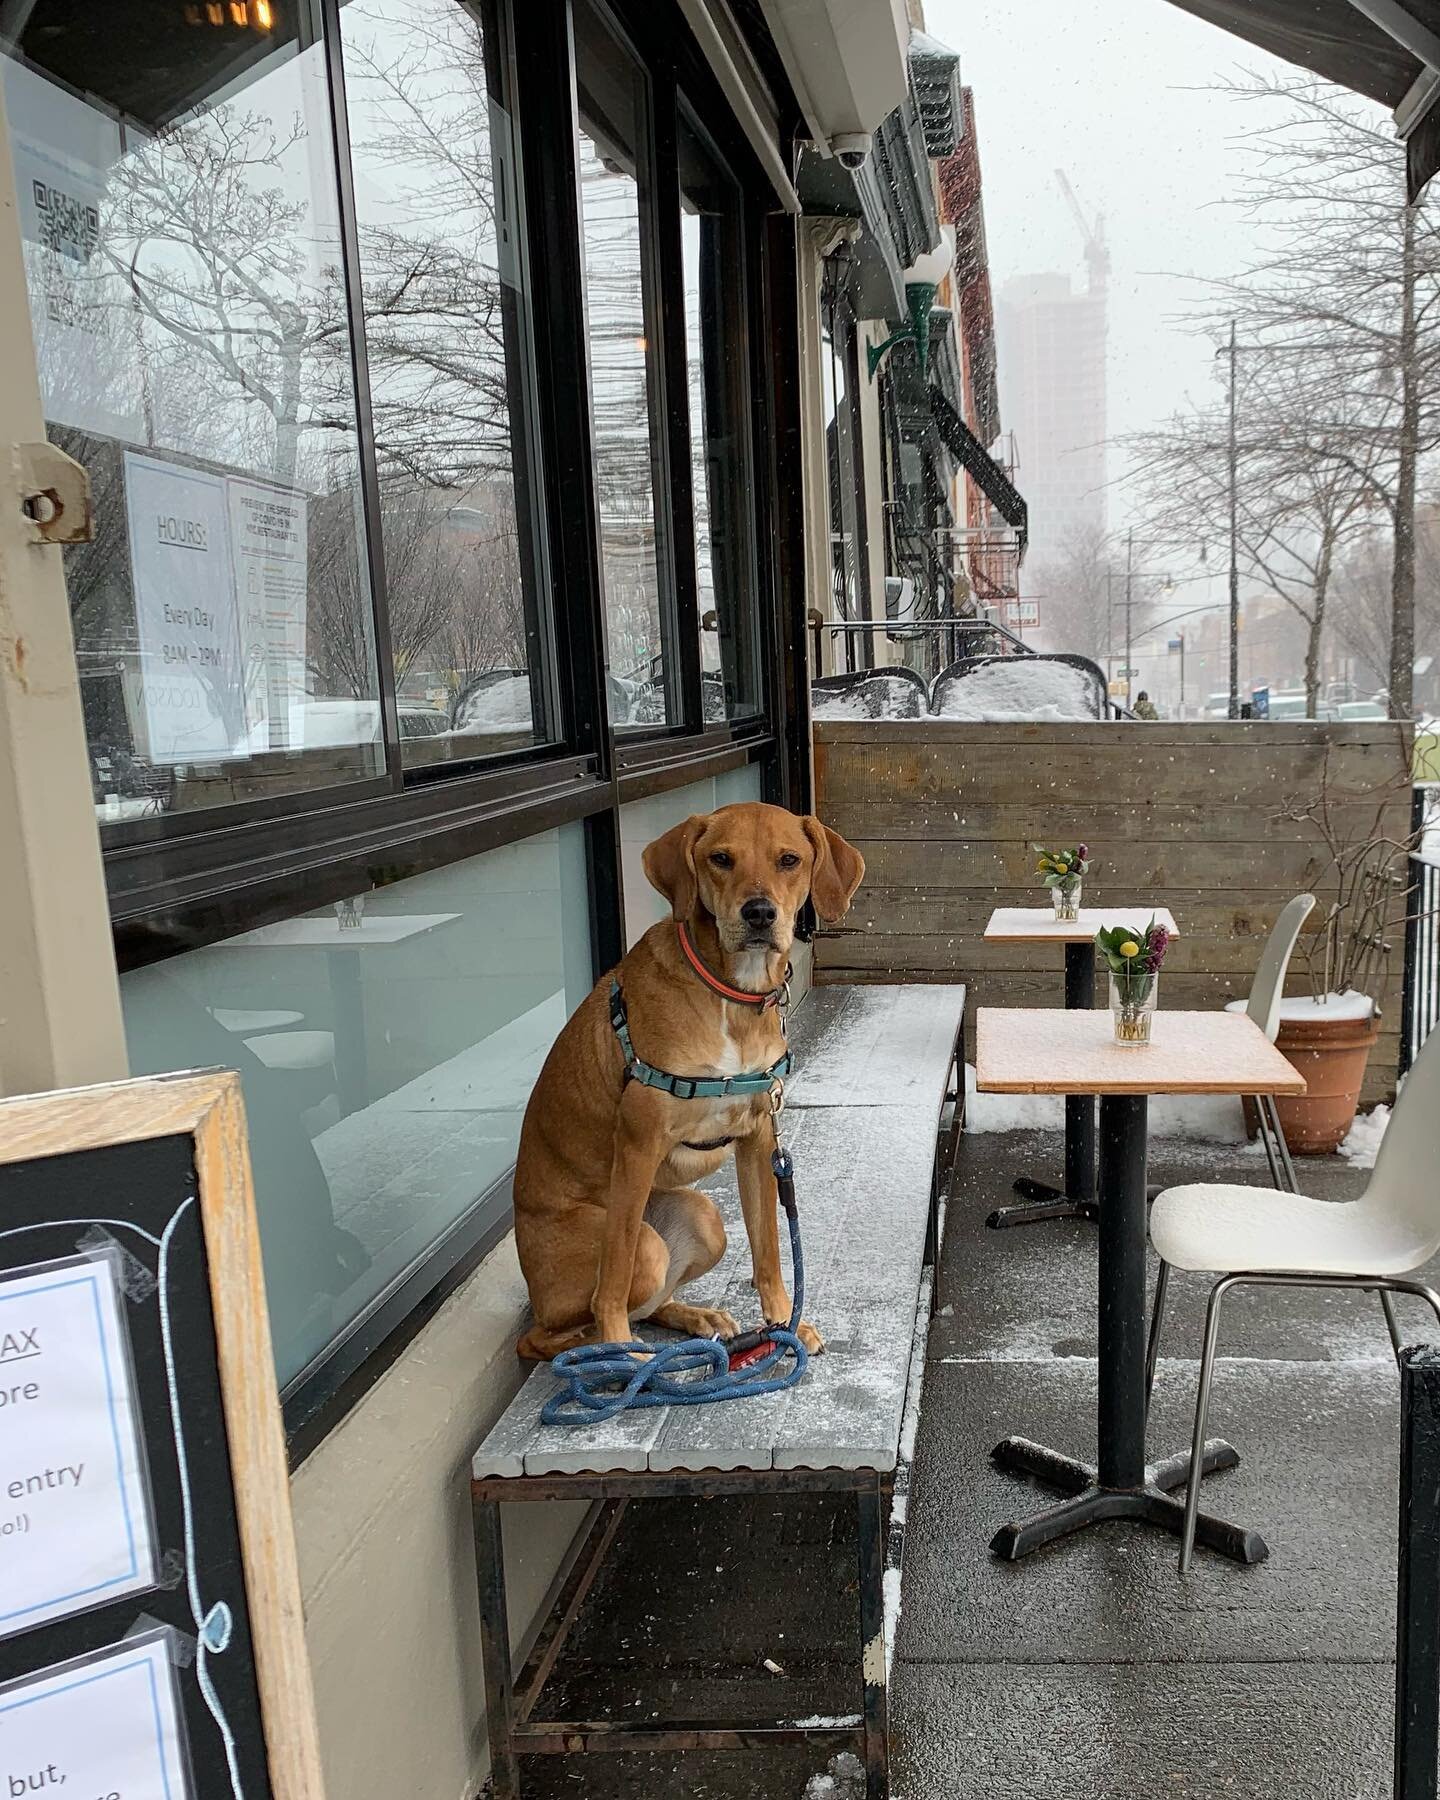 Roxy says &ldquo;what a pleasant place to enjoy a coffee, even in the flurries.&rdquo; ❄️ ☕️ 🐕 💕